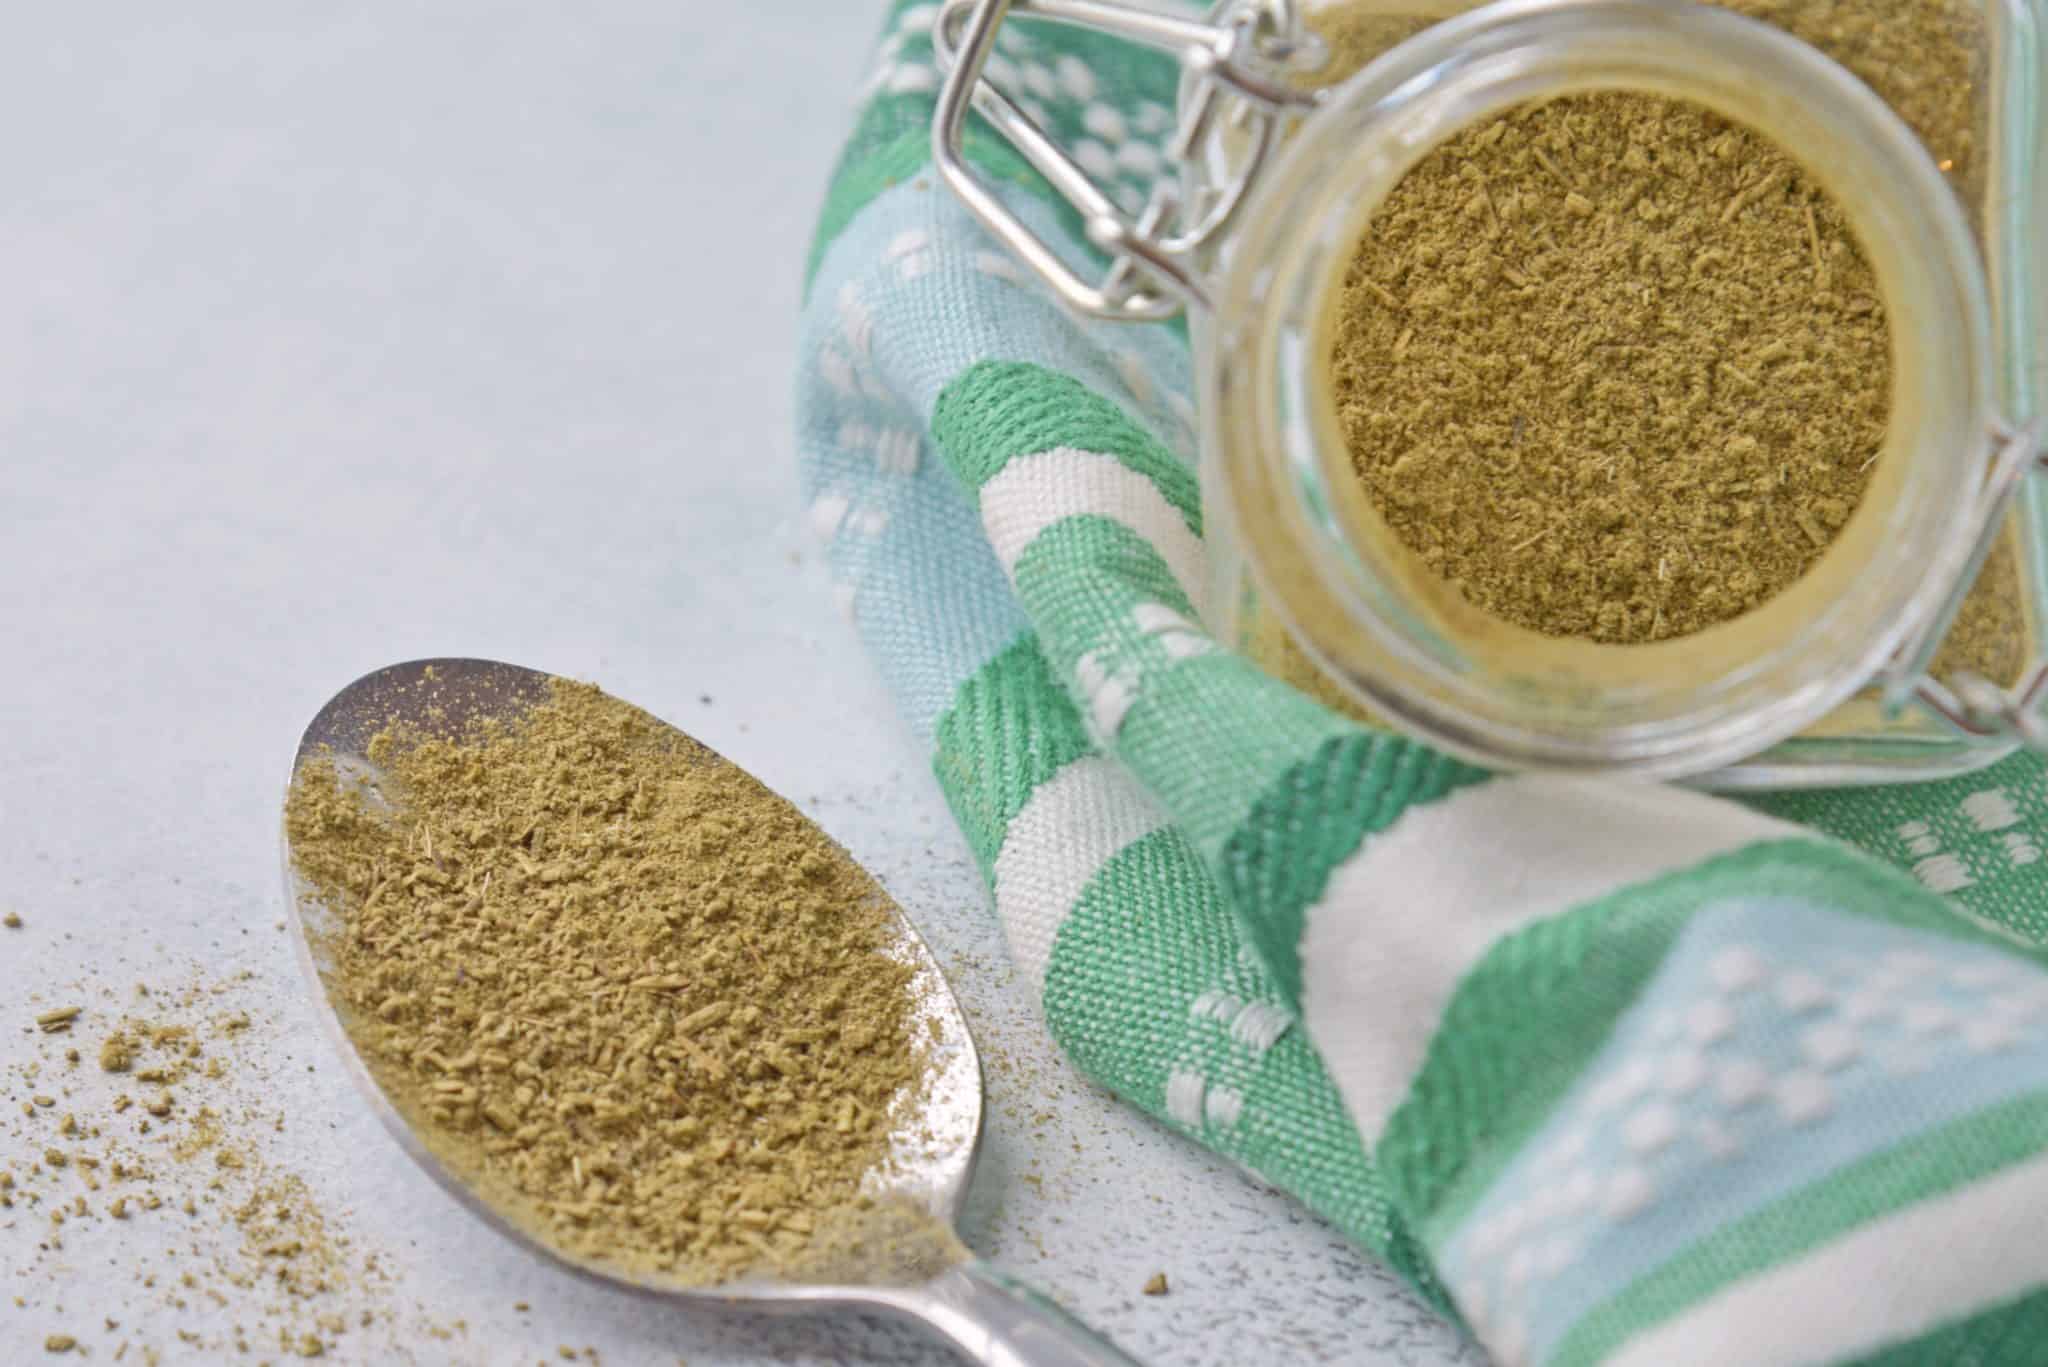 Homemade Poultry Seasoning is super easy to make, you probably already have all the ingredients in your pantry! Season chicken, beef, seafood and more! #poultryseasoning #homemadespices www.savoryexperiments.com